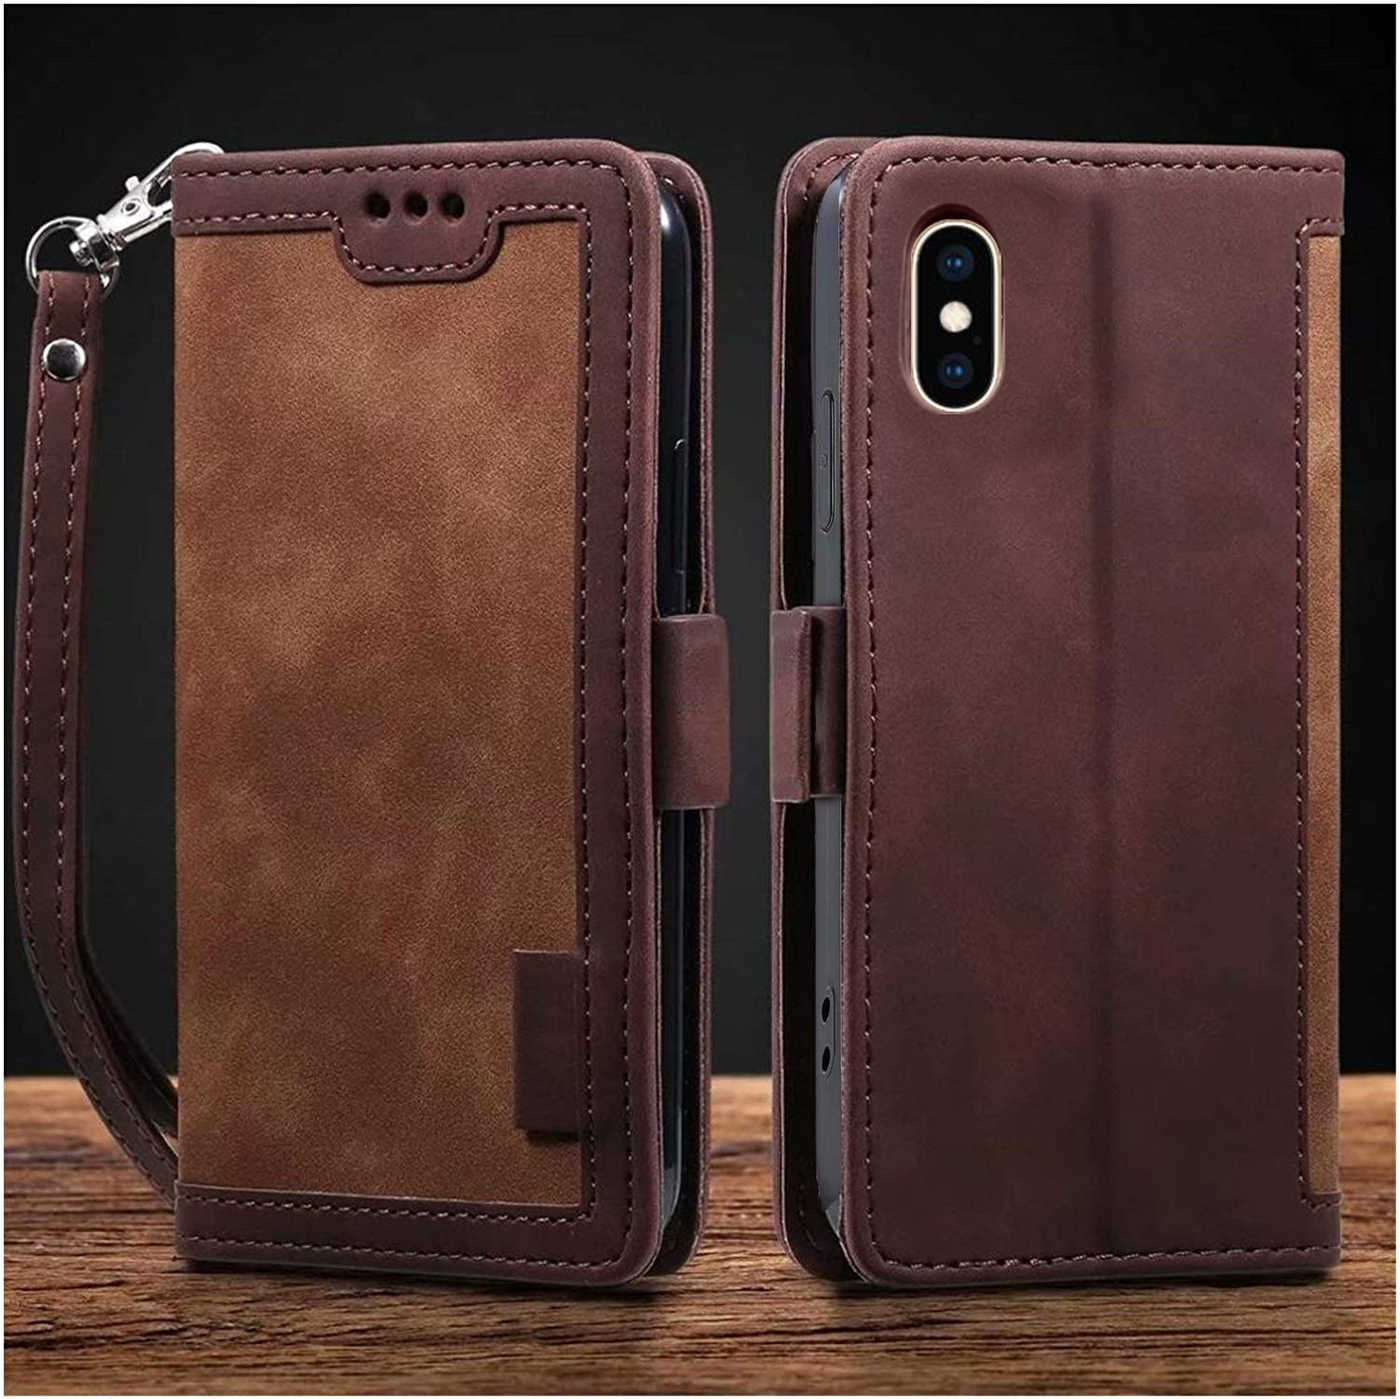 Apple iPhone XS Max Coffee color leather wallet flip cover case By excelsior